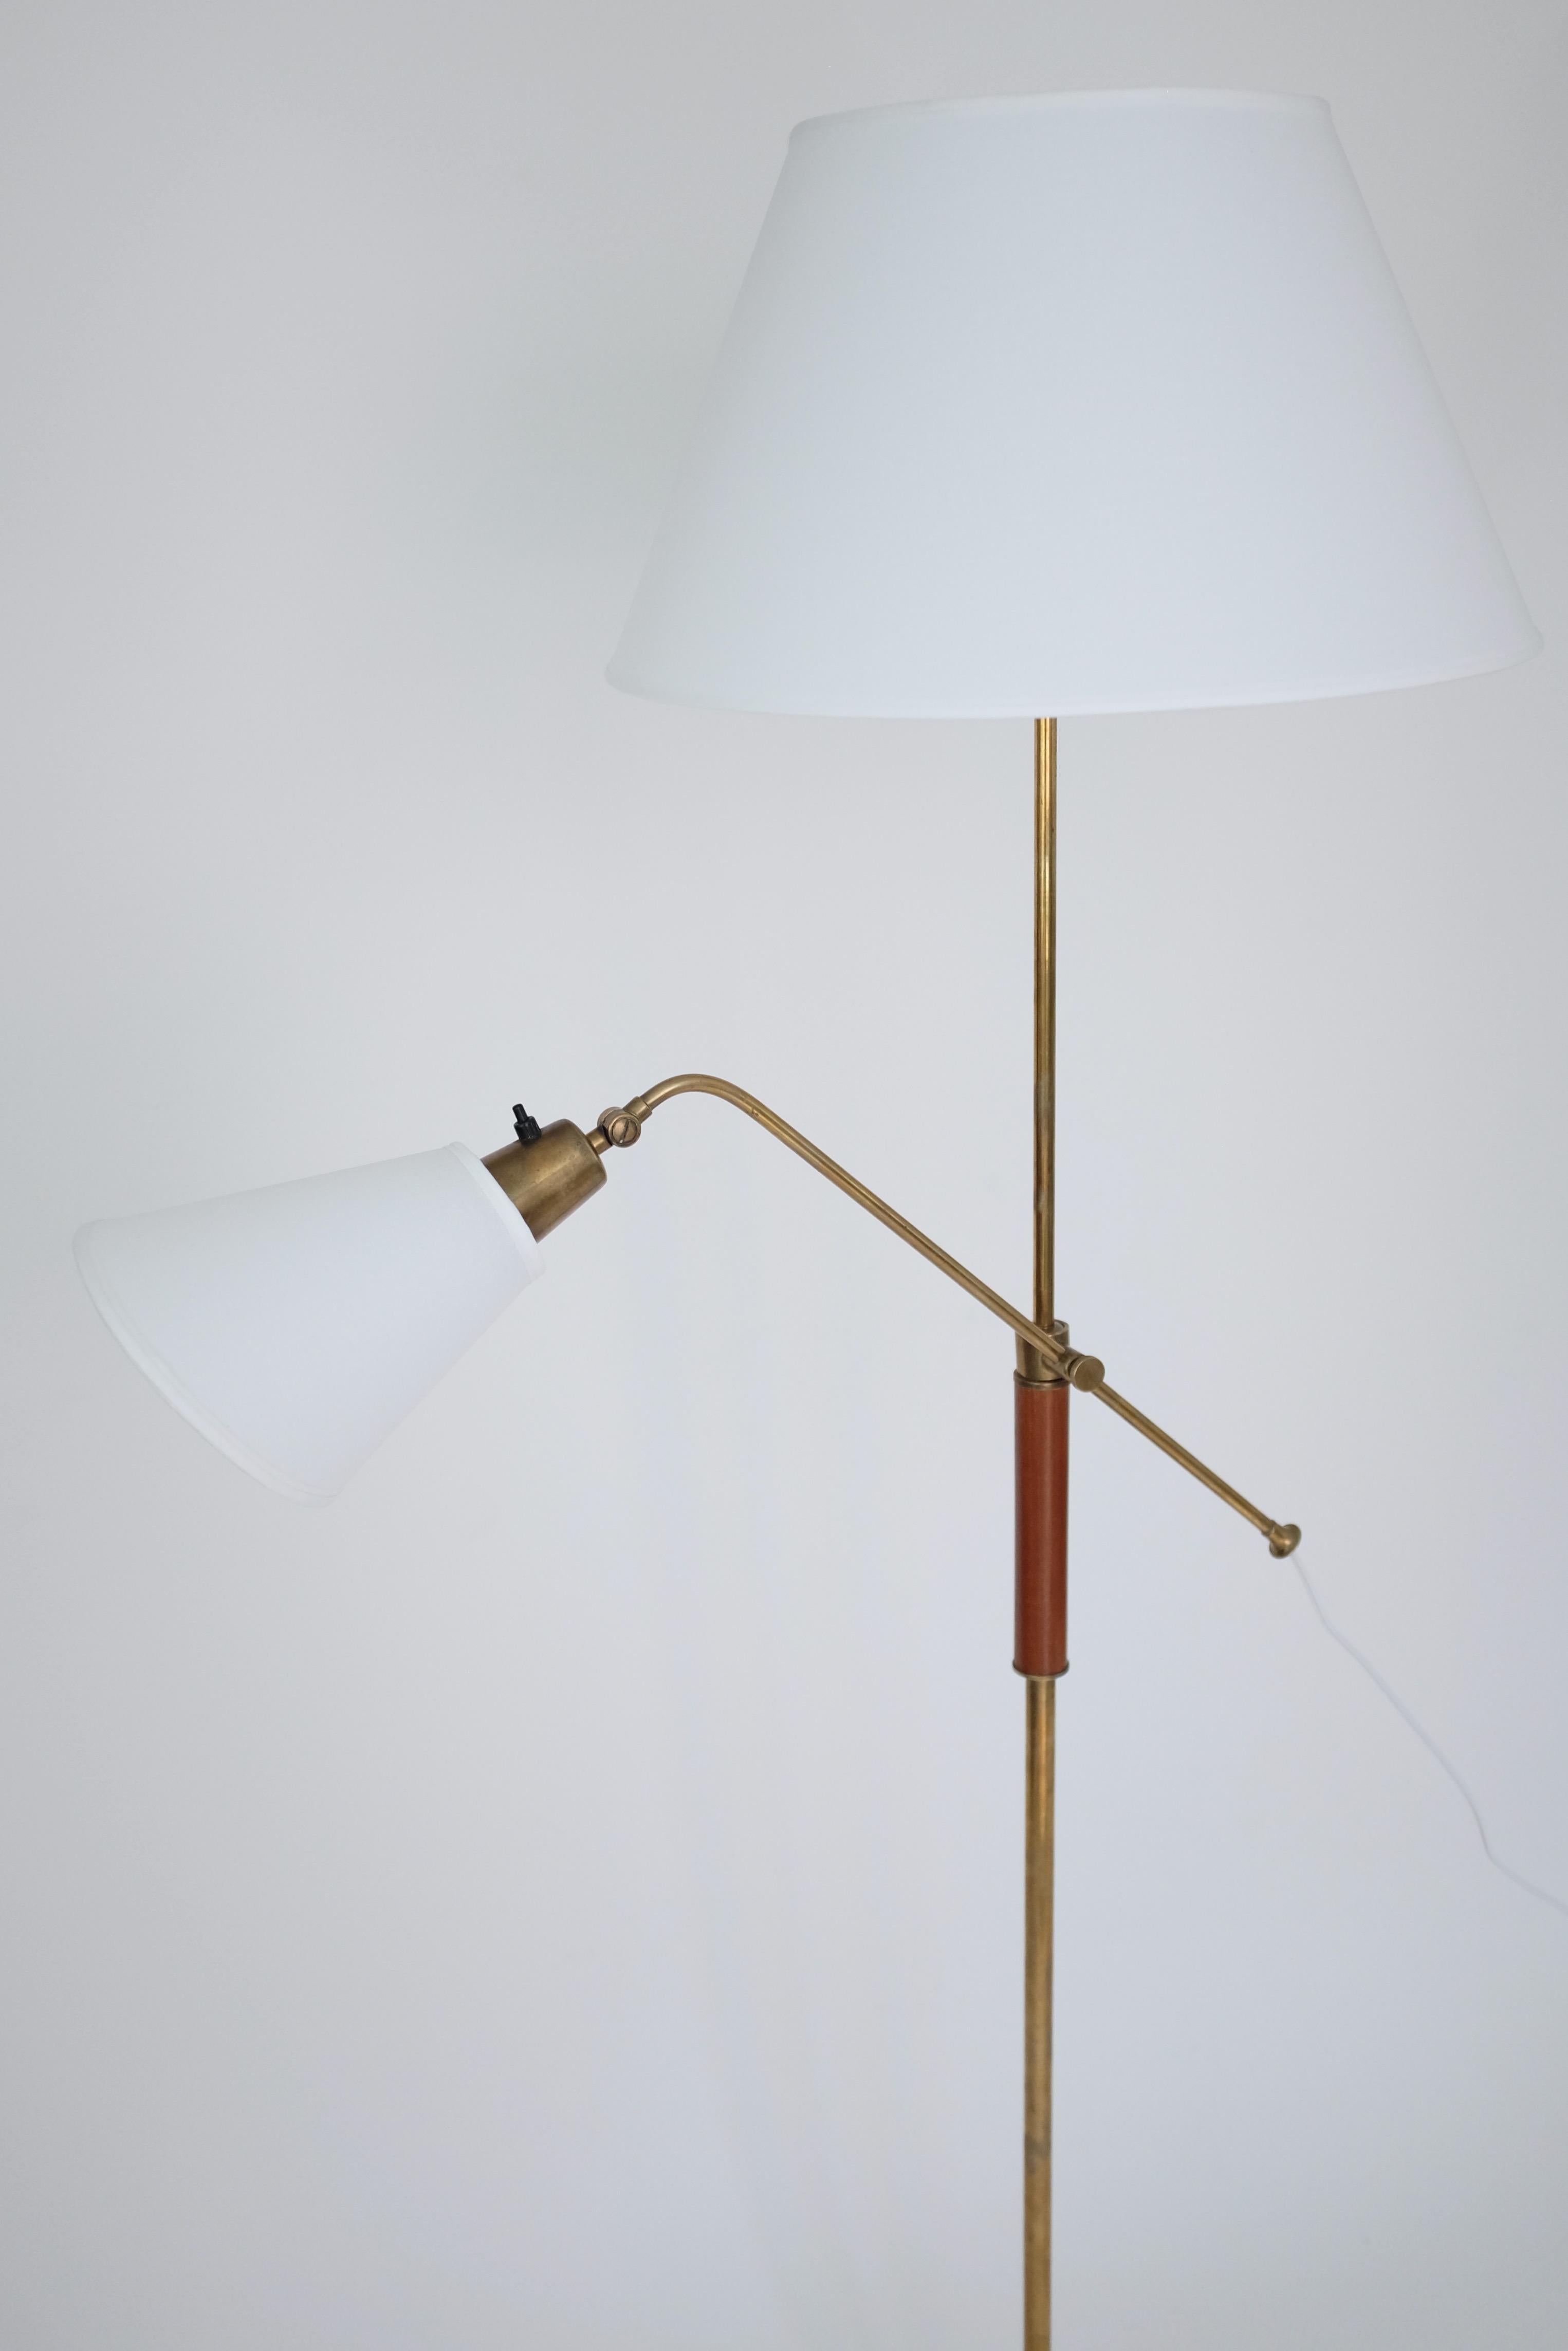 Impressive two armed brass and wood floor lamp by Bertil Brisborg for Nordiska Kompaniet. Manufactured in the 1950's where the designer served as Chief Architect for the lighting department for many years. The main lamp can be adjusted in height and